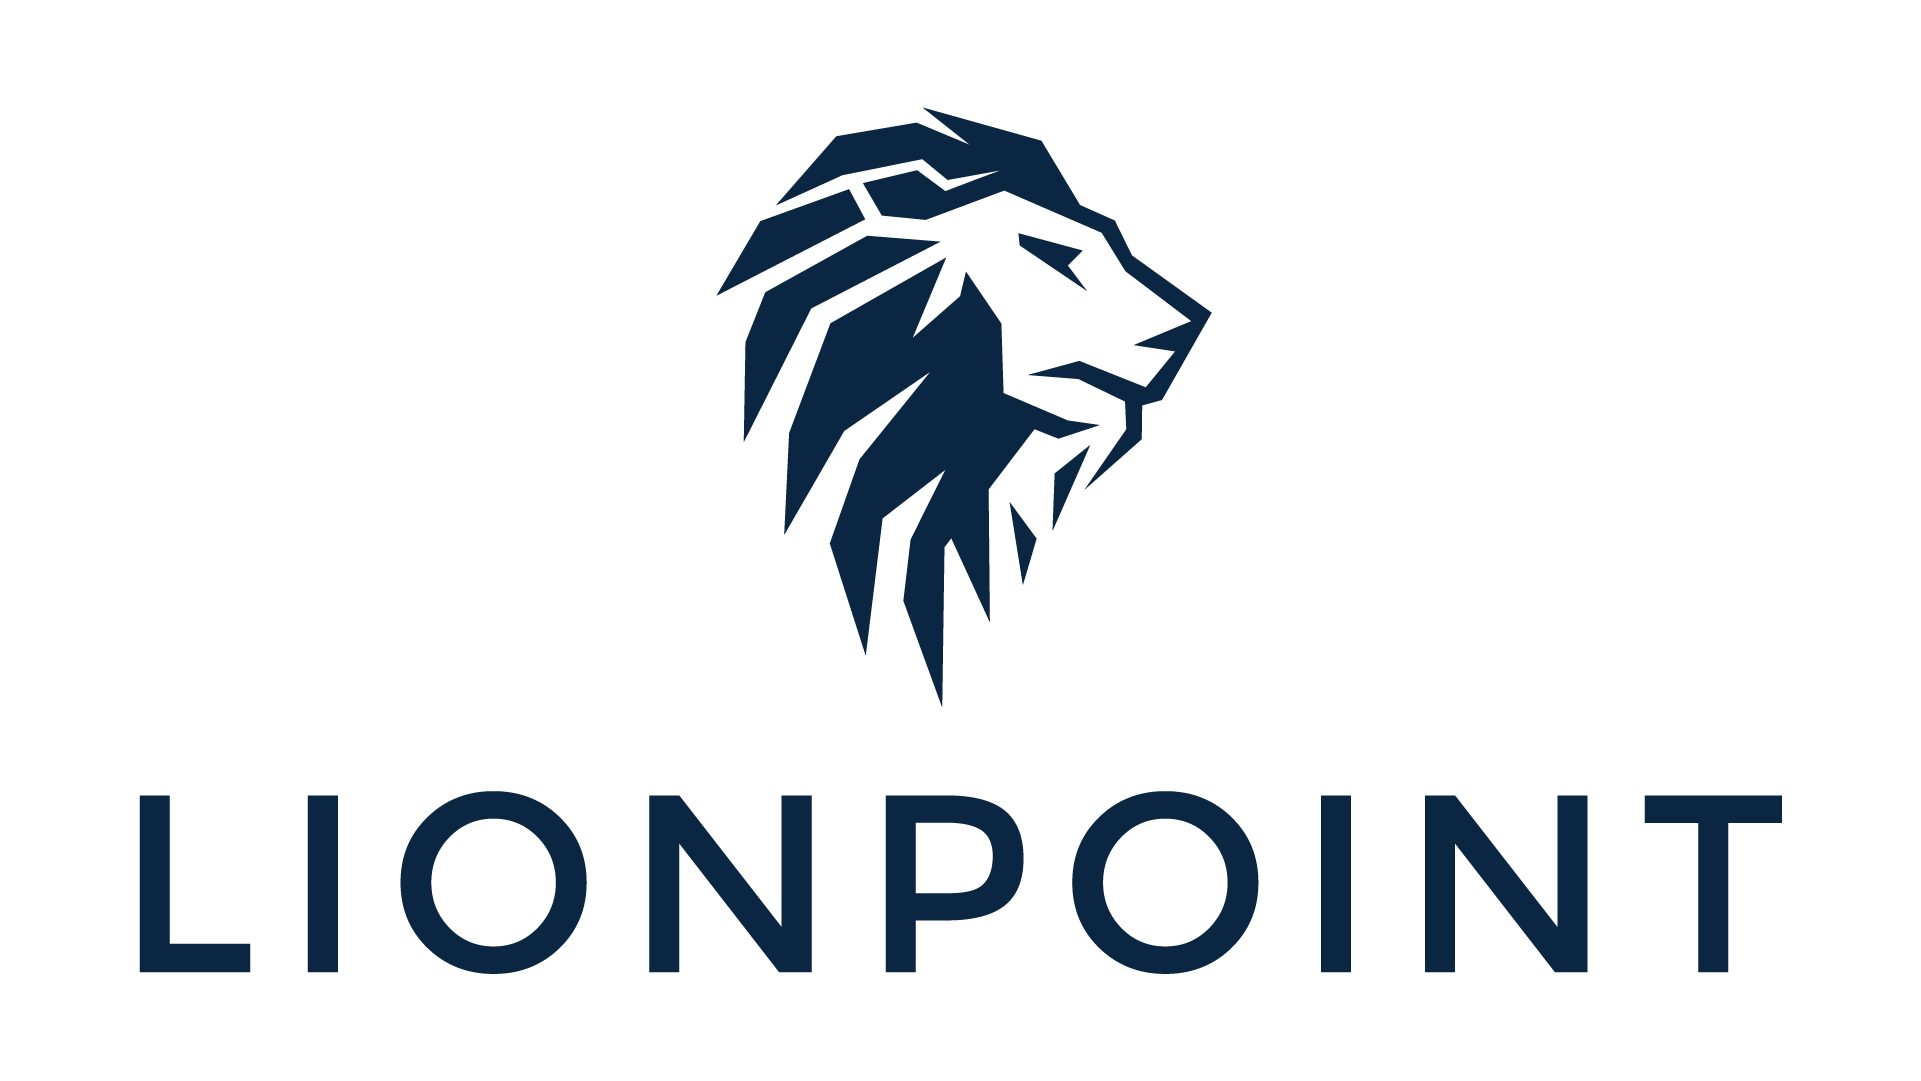 Lionpoint Group